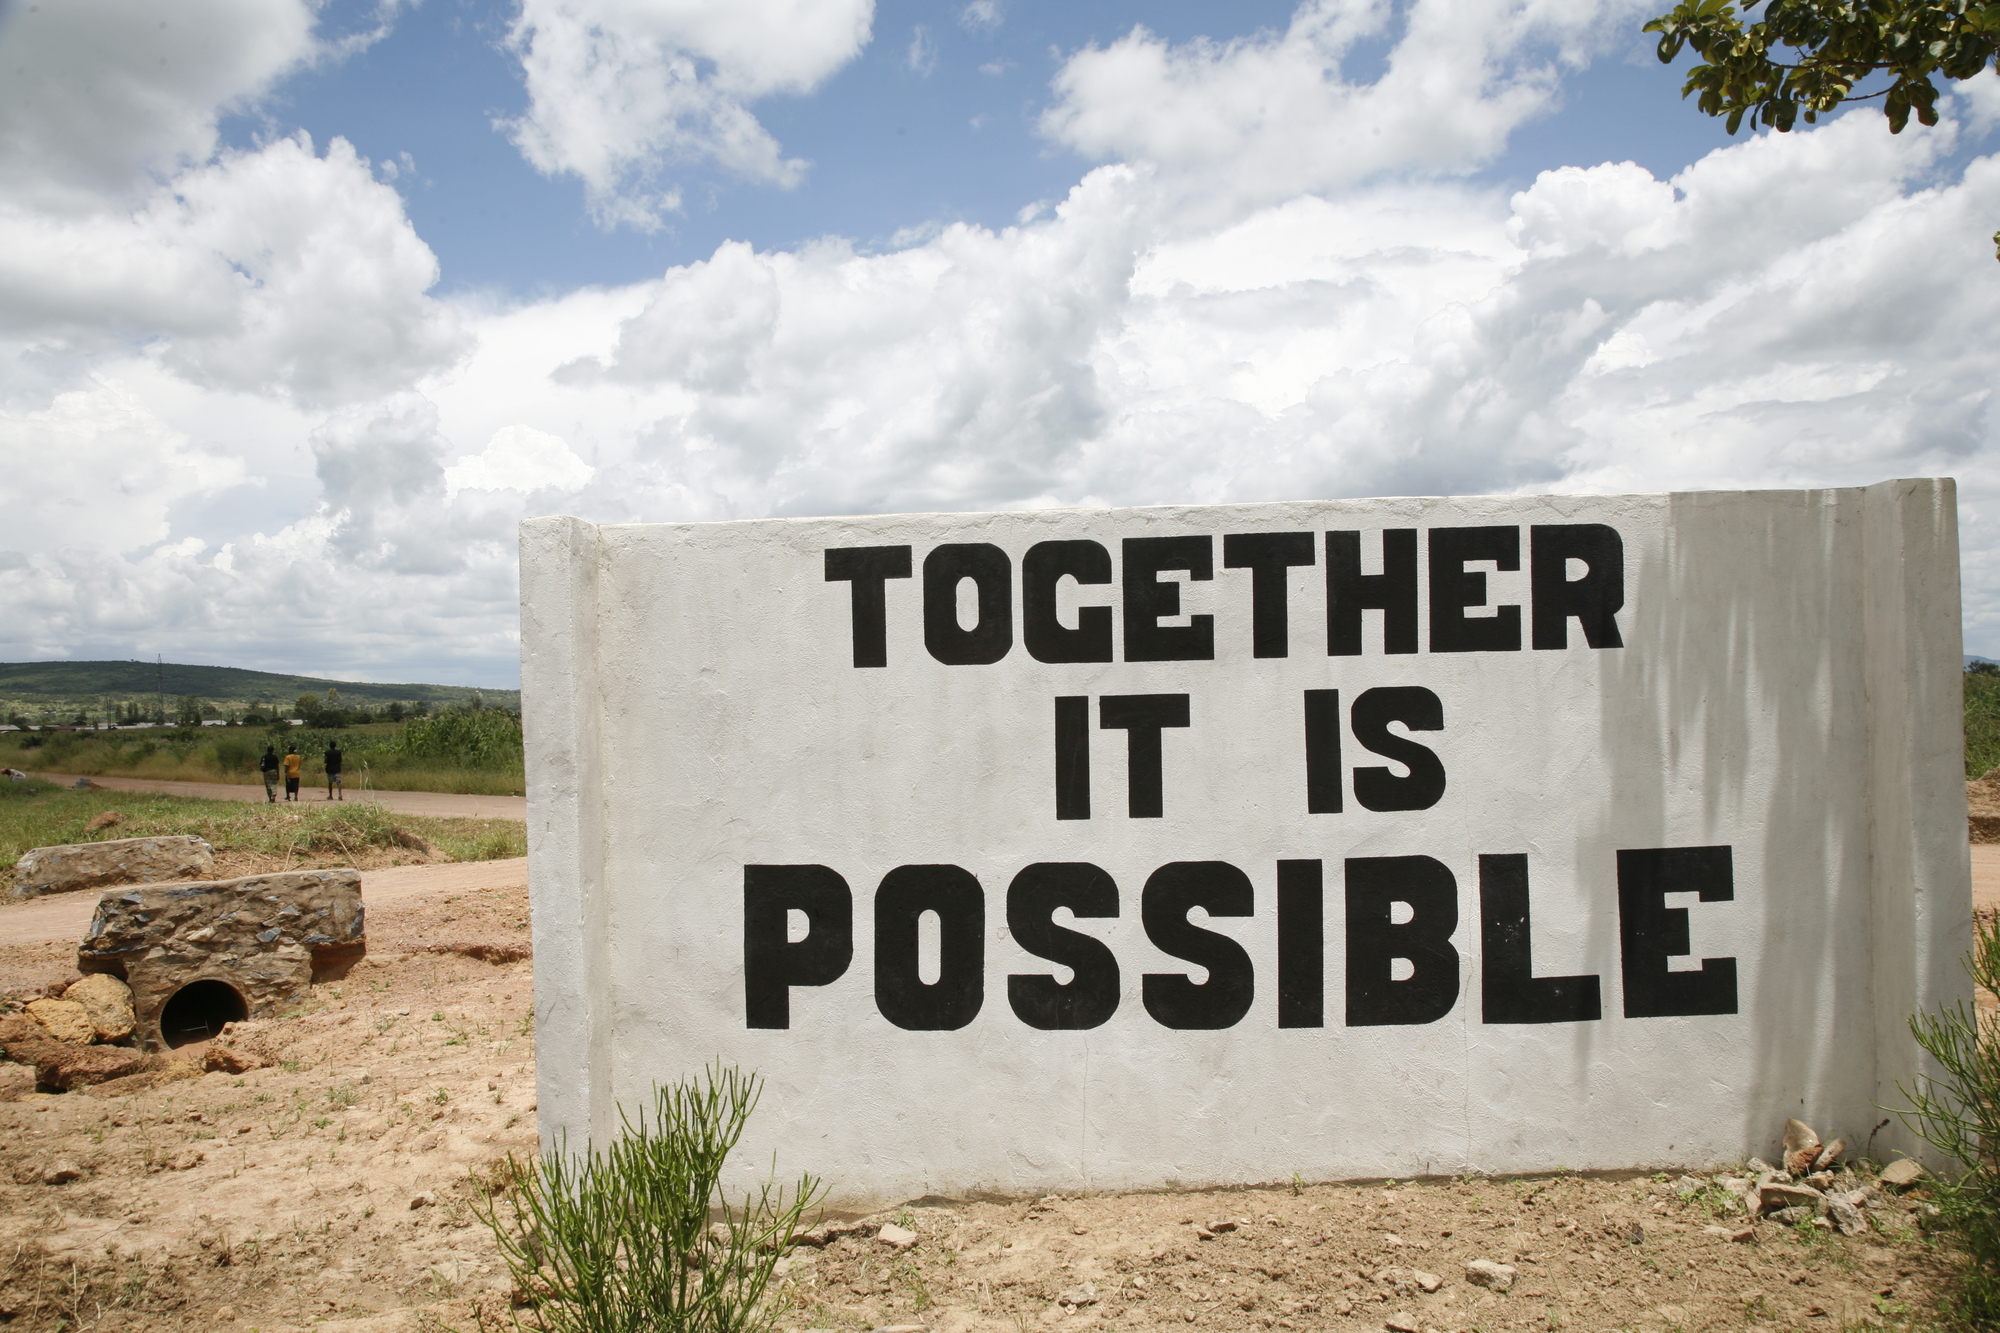 A sign that reads "Together It Is Possible" in large letters